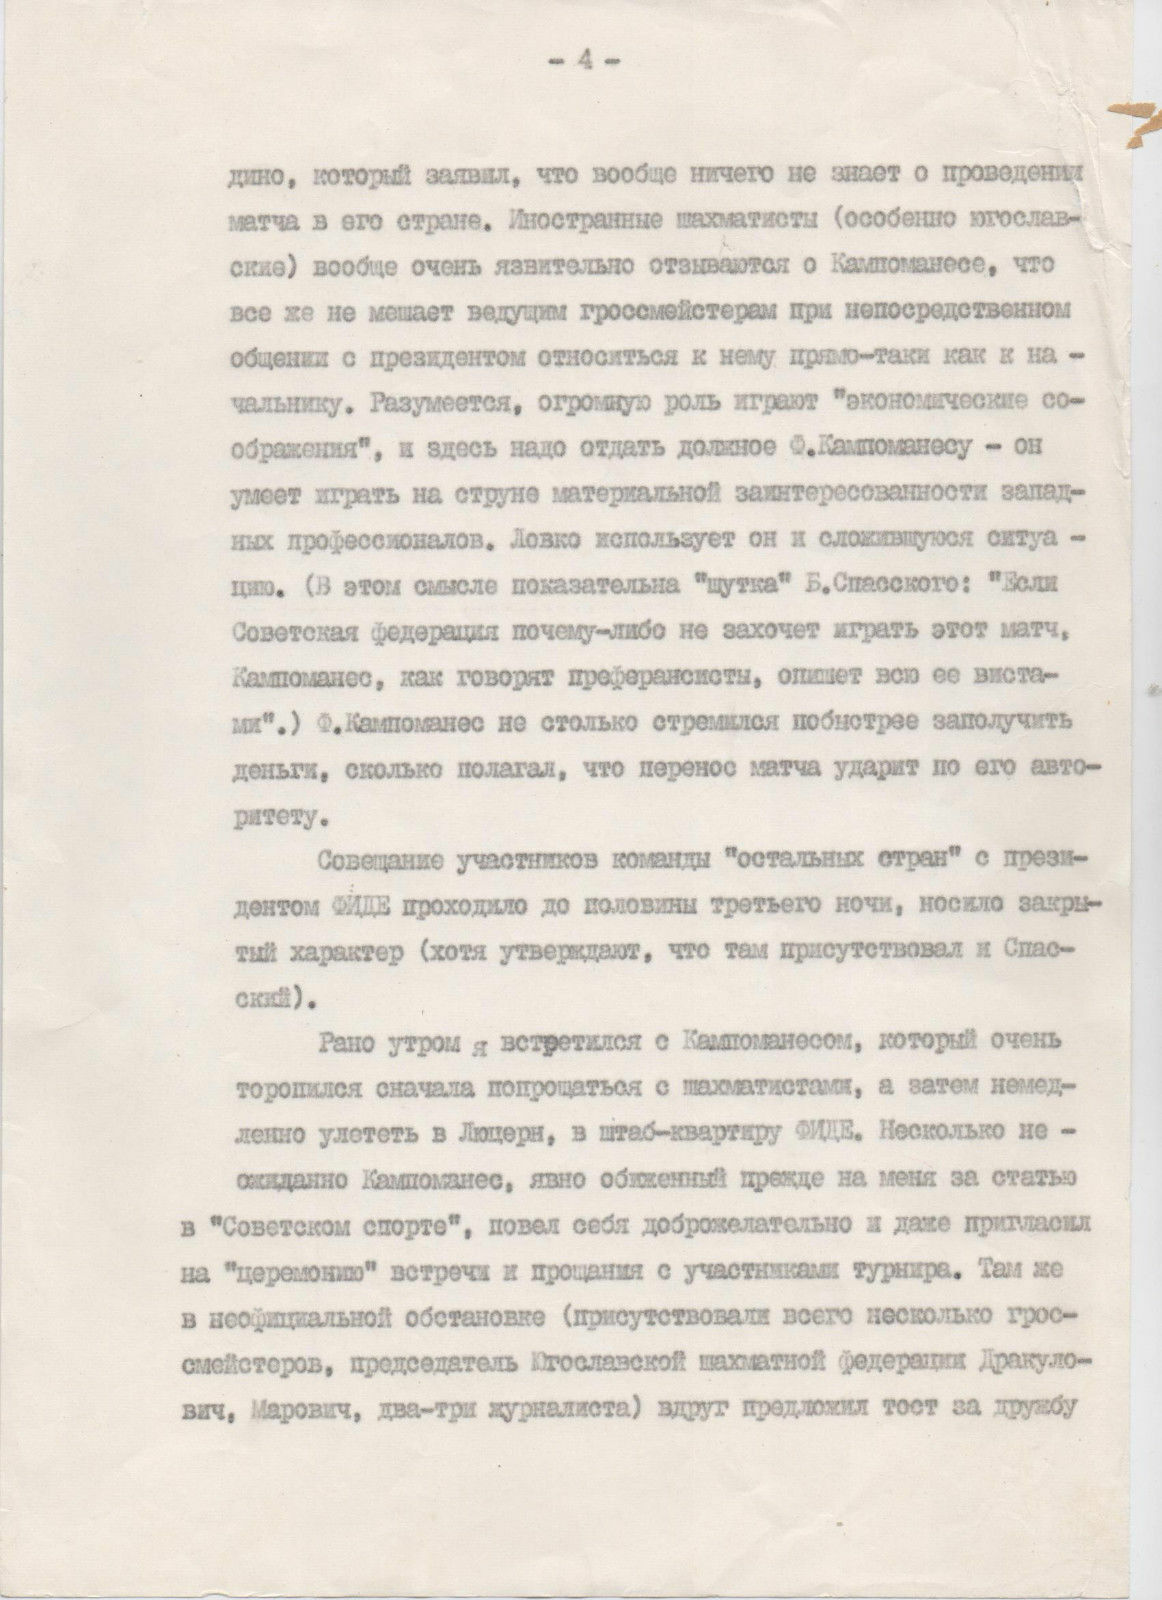 11588.Russian Chess: A.Roshal. Report on trip to Yugoslavia June 5-13, 1984